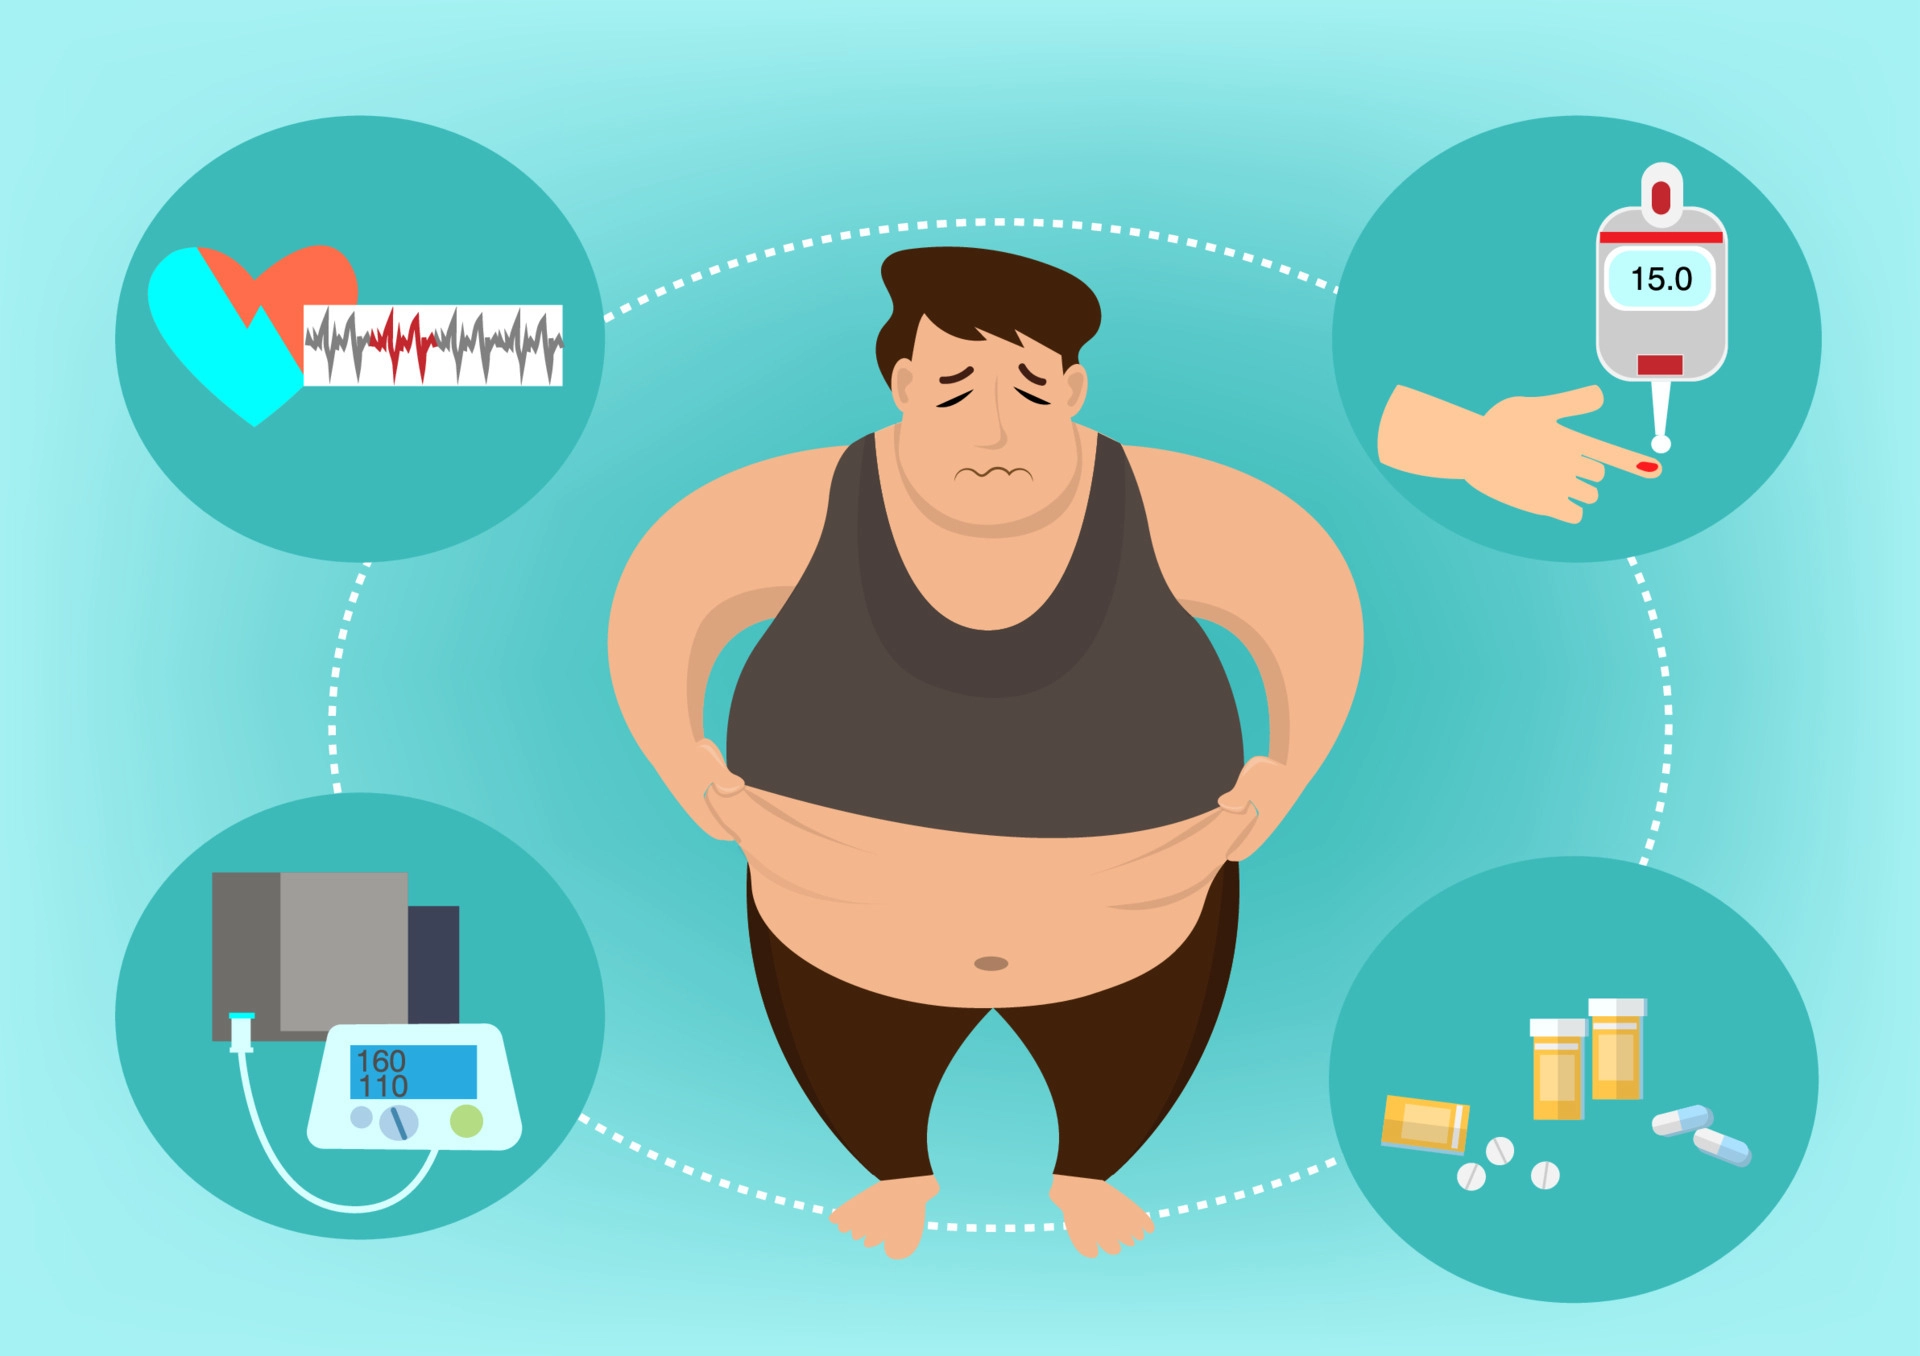 overweight-problems-heart-disease-treatment-obesity-health-problems-high-blood-pressure-high-blood-sugar-passive-lifestyle-metaphor-isolated-concept-comparison-illustration-free-vector